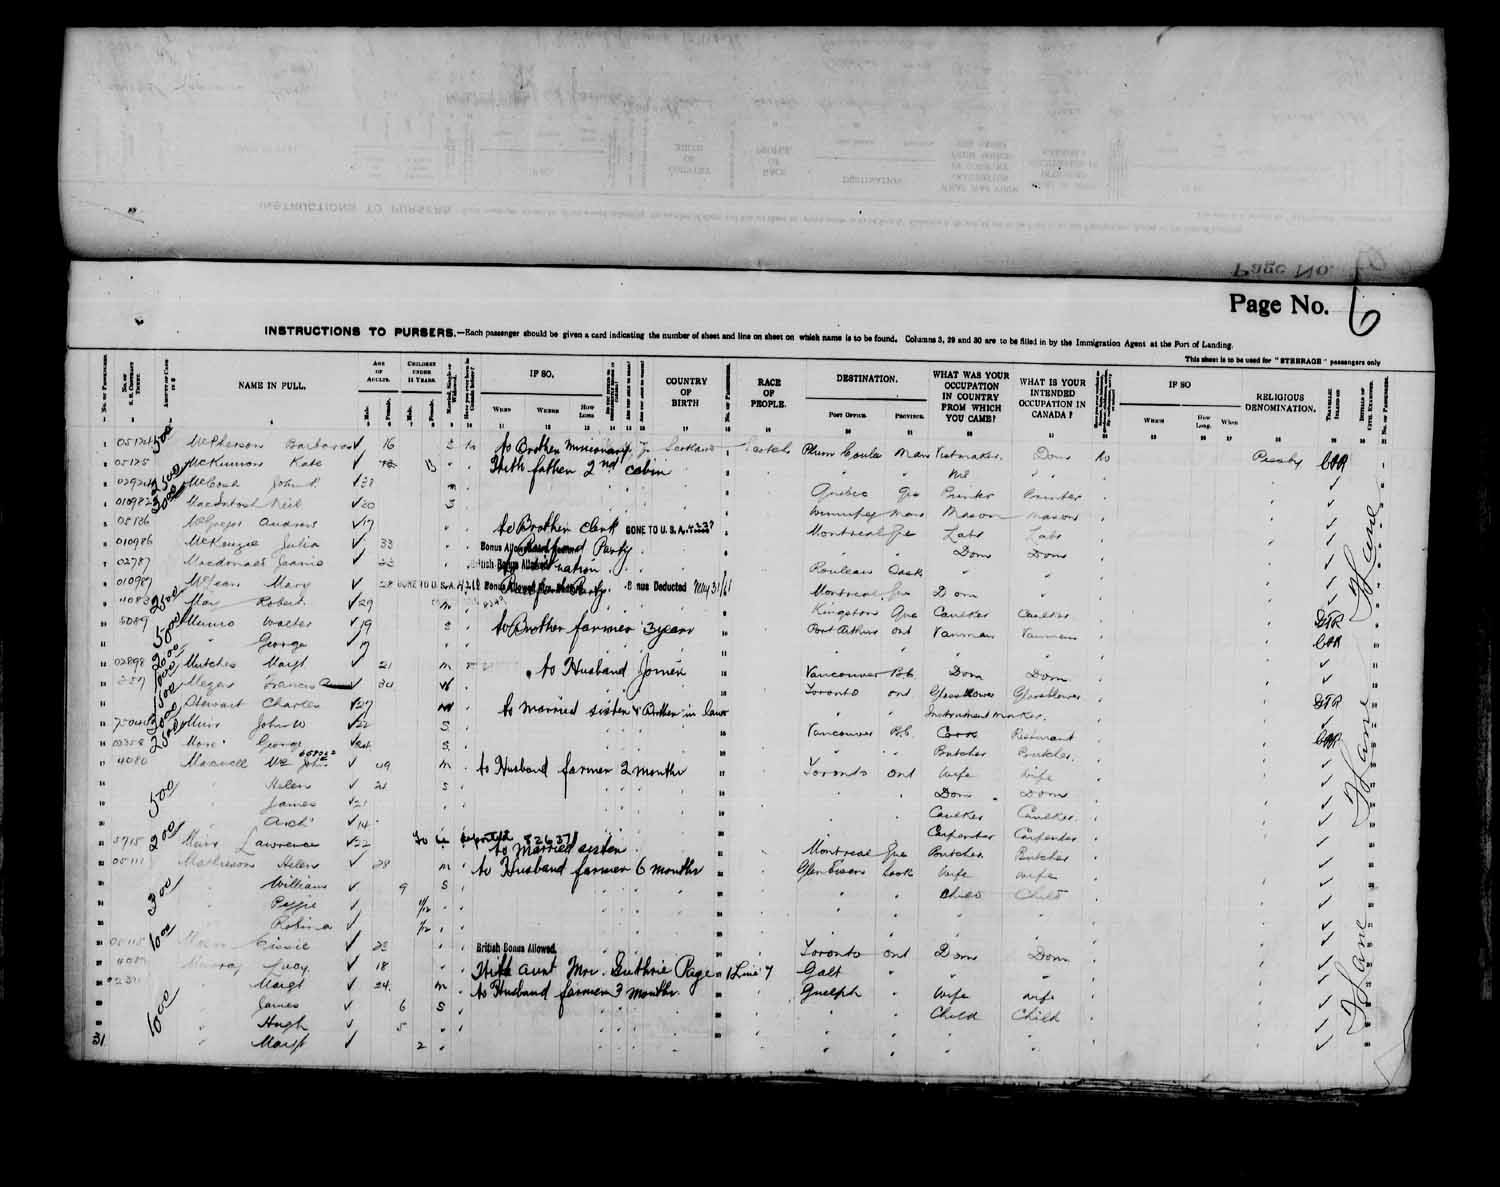 Digitized page of Passenger Lists for Image No.: e003566525